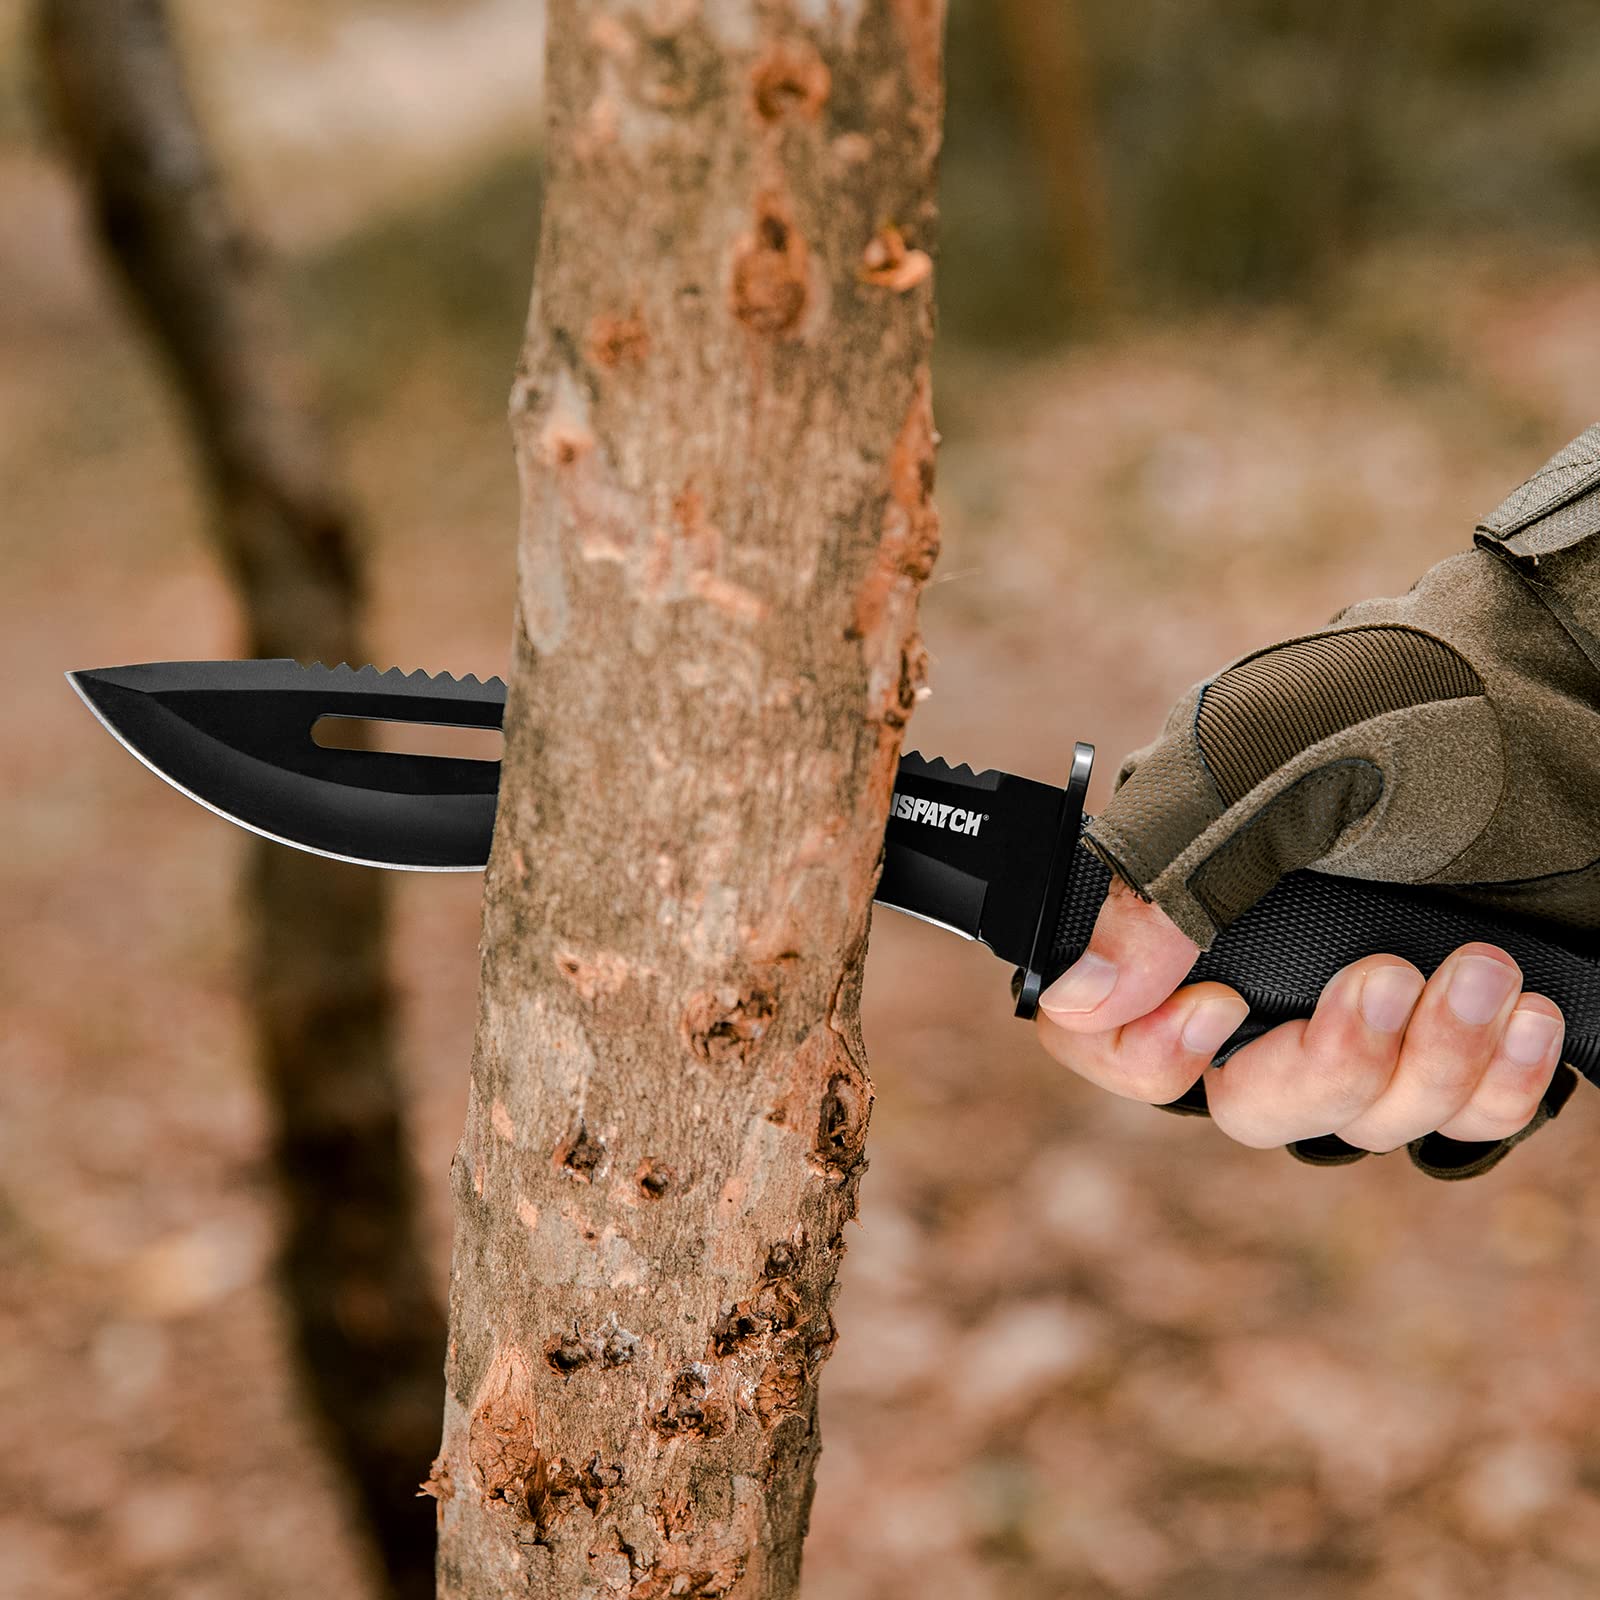 Dispatch Tactical Kukri Machete Survival Hunting Knife with Kukri Recurved Blade, Steel Head Steel Tail of Fixed Blade Knife with Sheath for Outdoor Survival, Camping, and Bushcraft